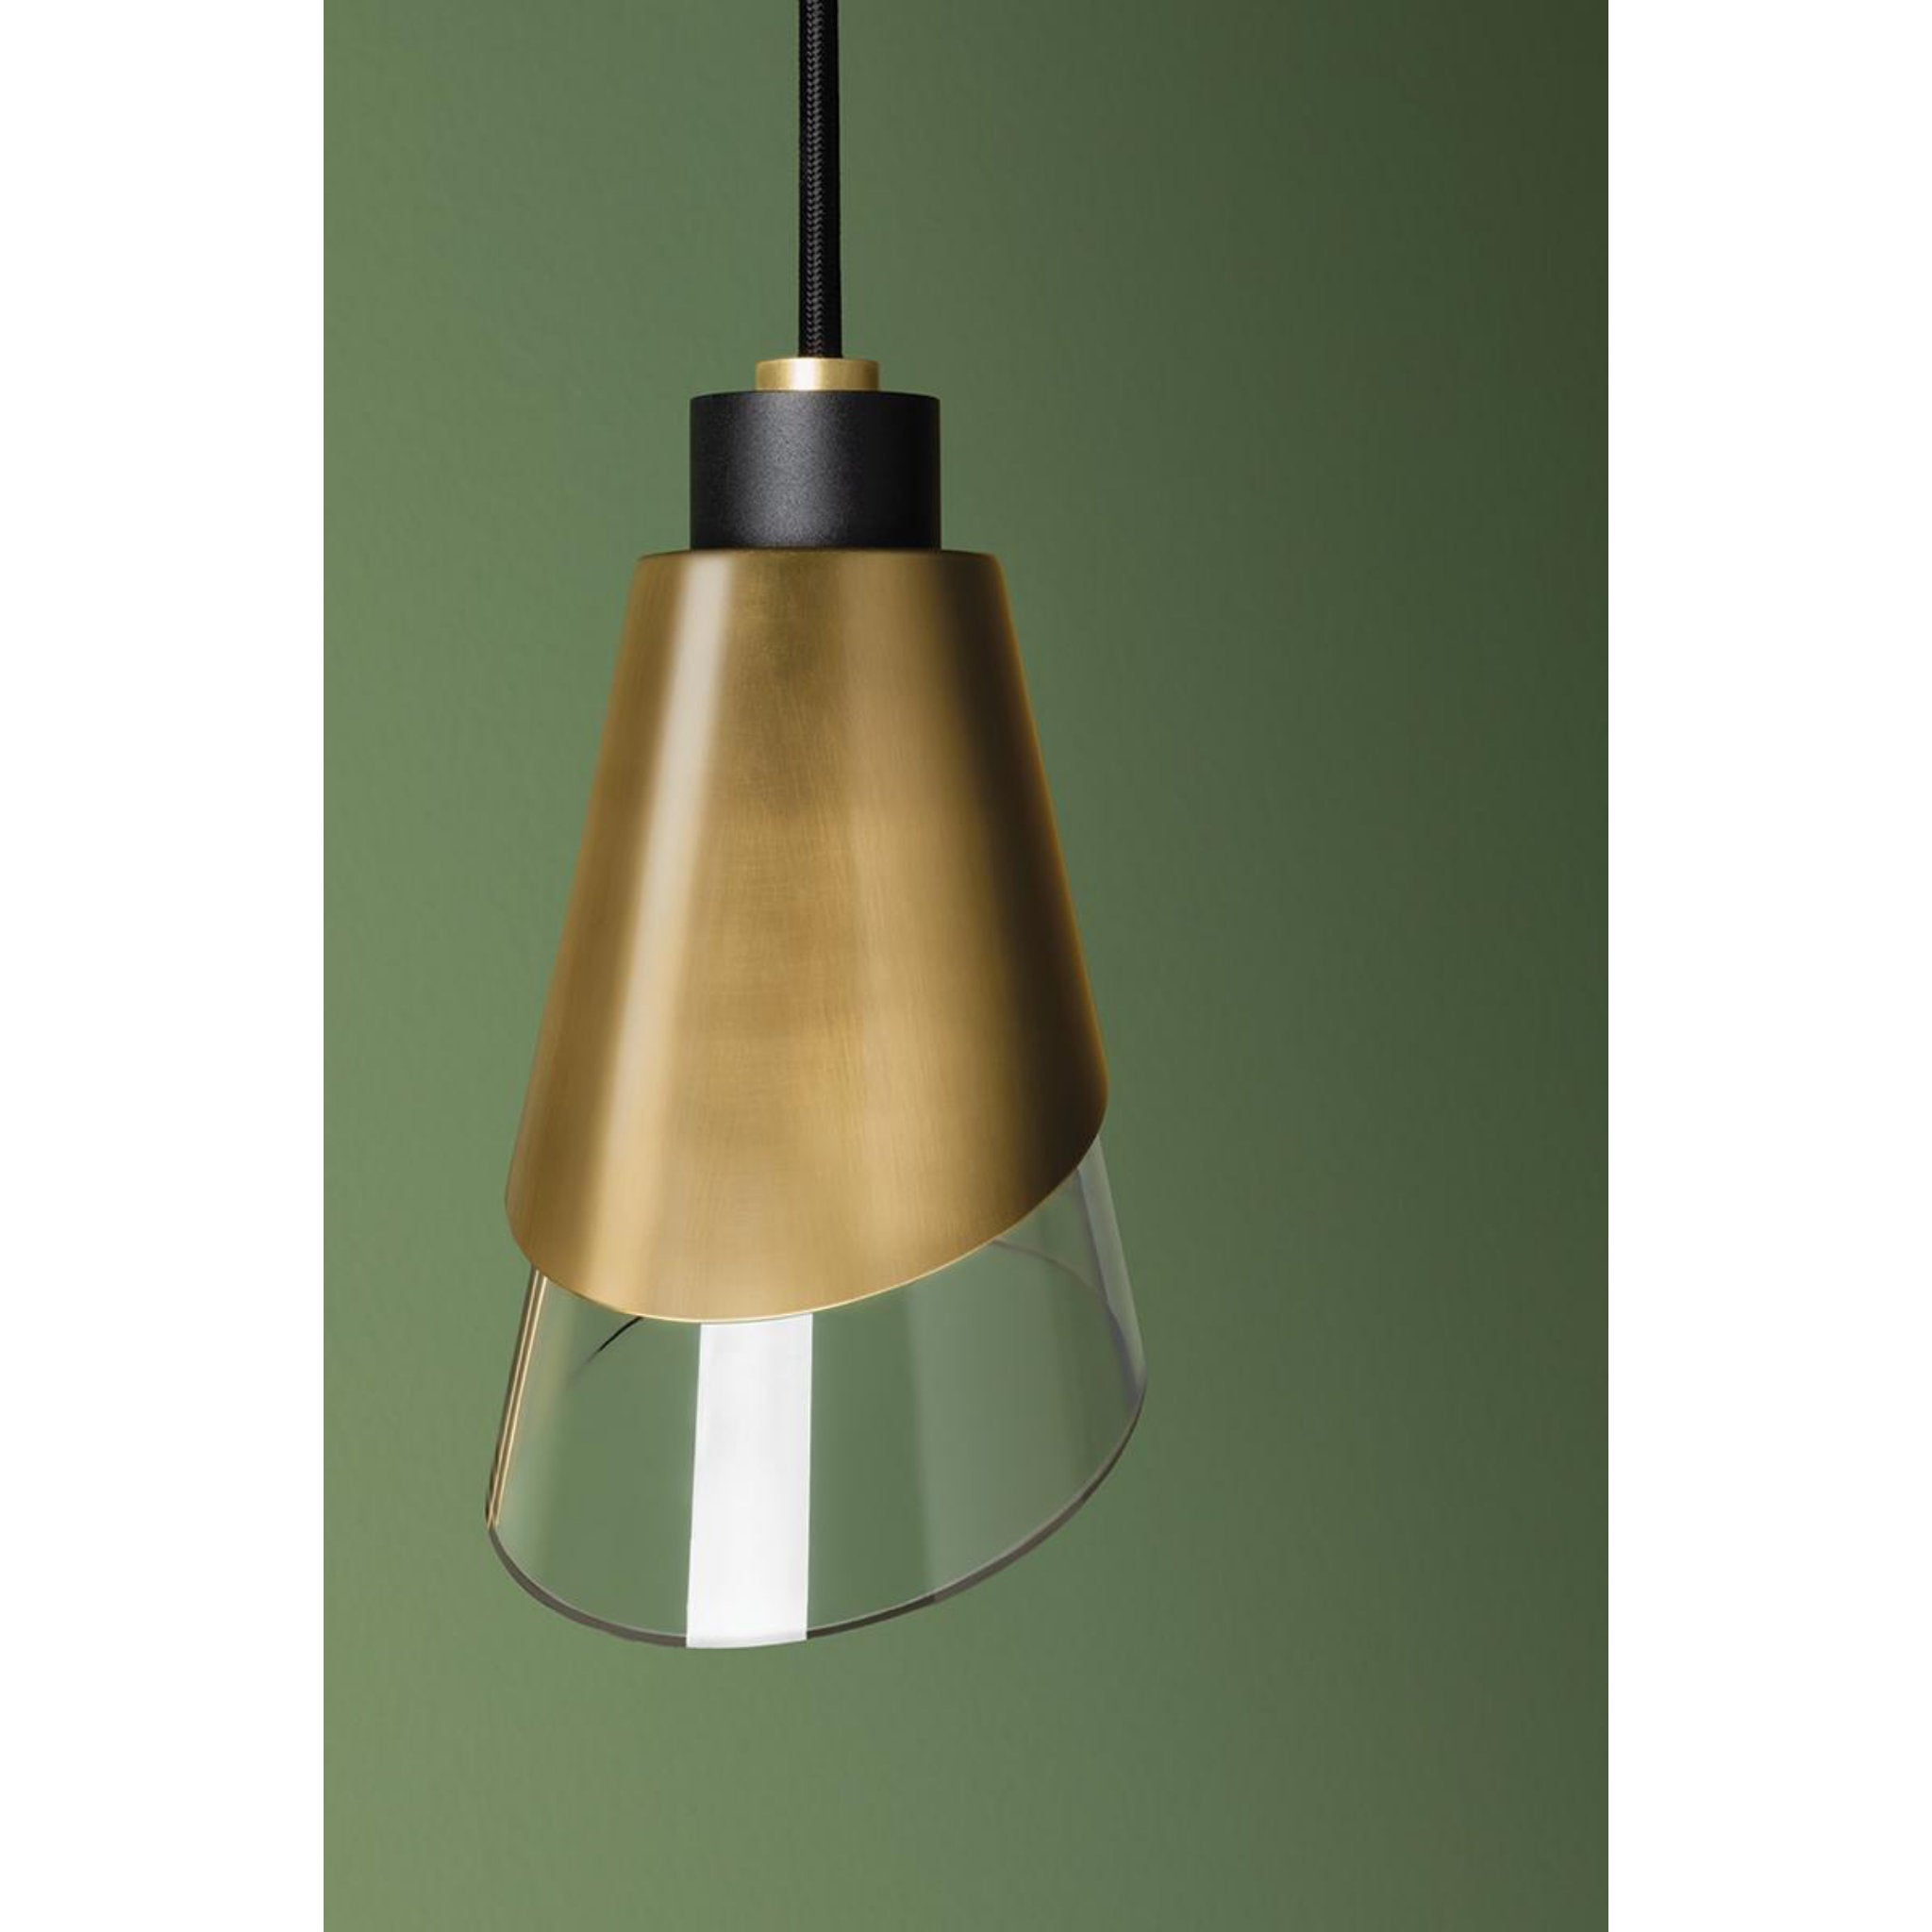 Angie 2-Light Wall Sconce in Aged Brass/Black